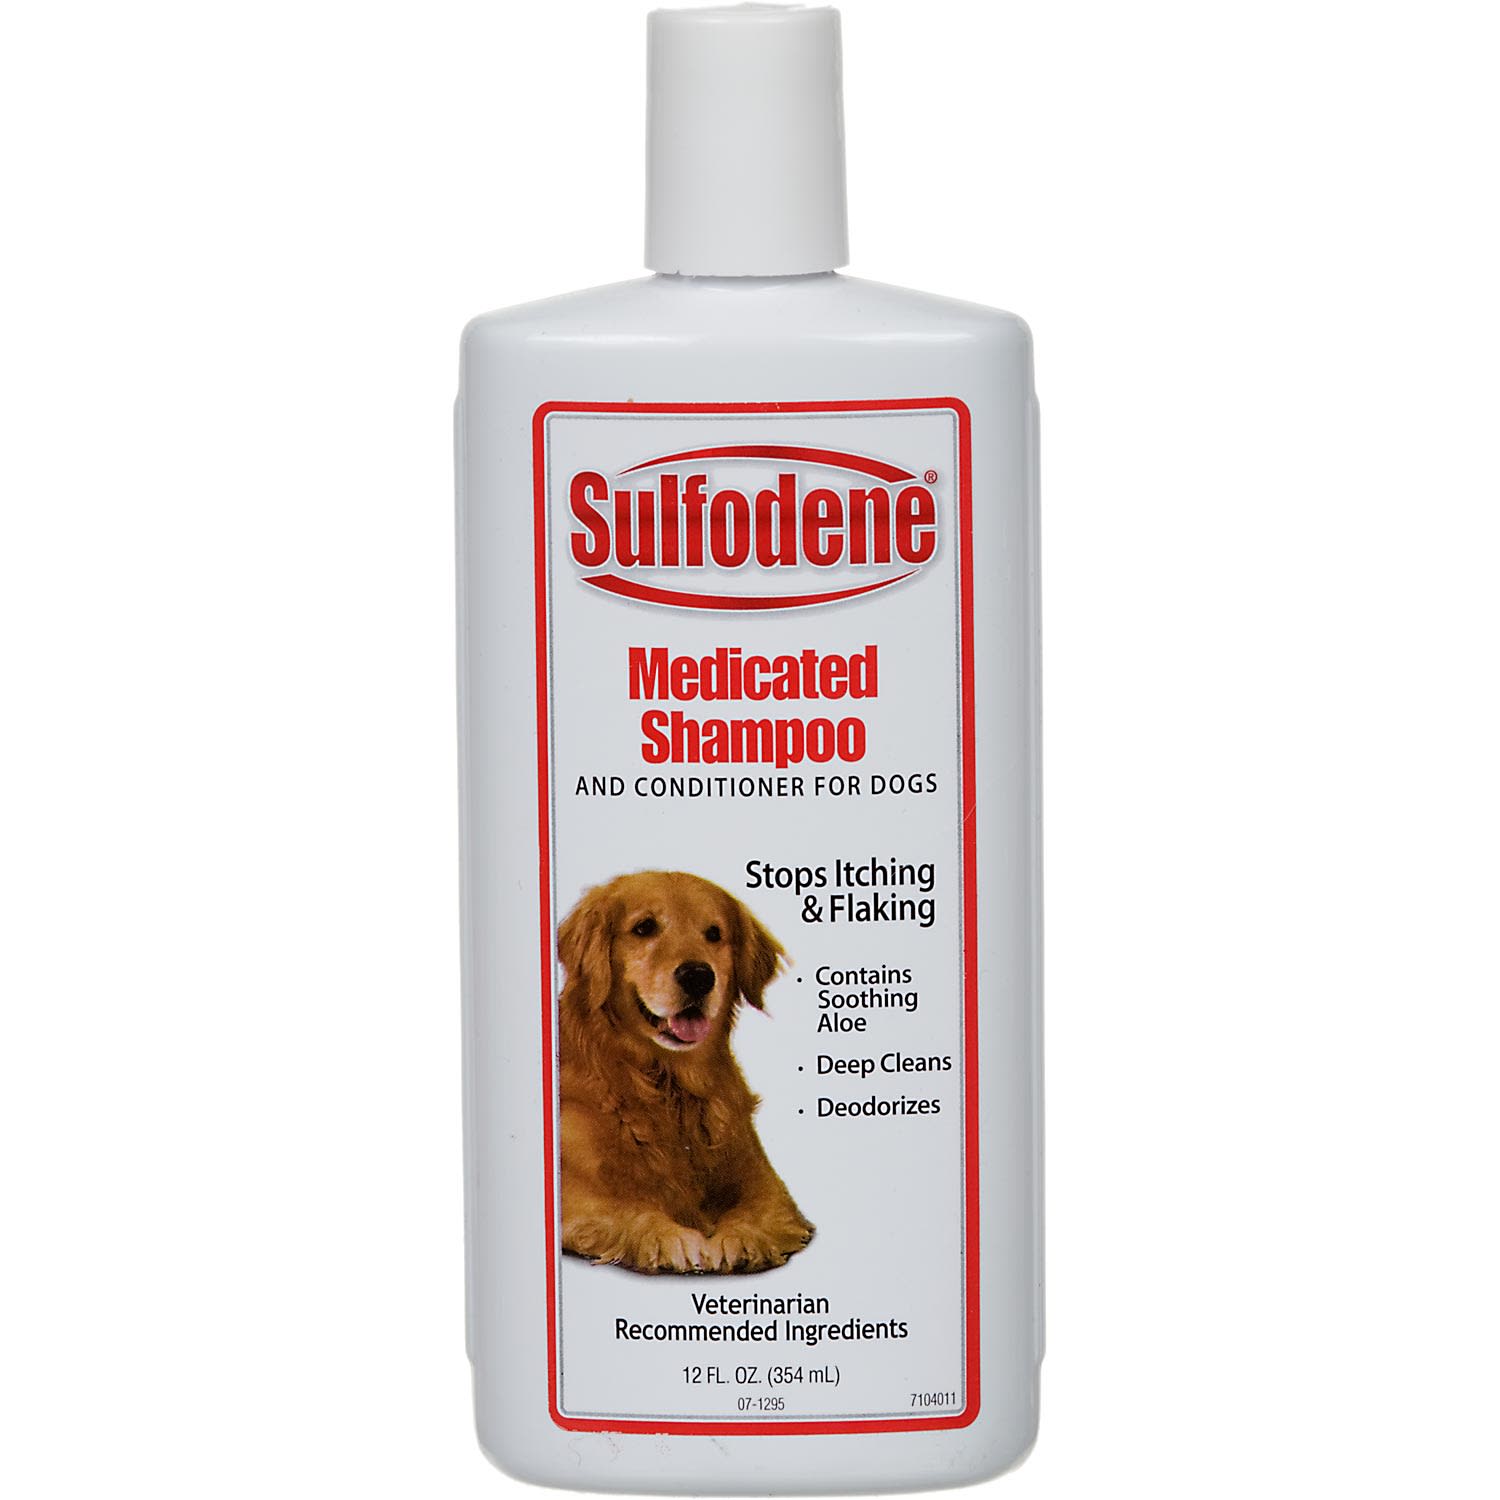 demodectic mange shampoo for dogs